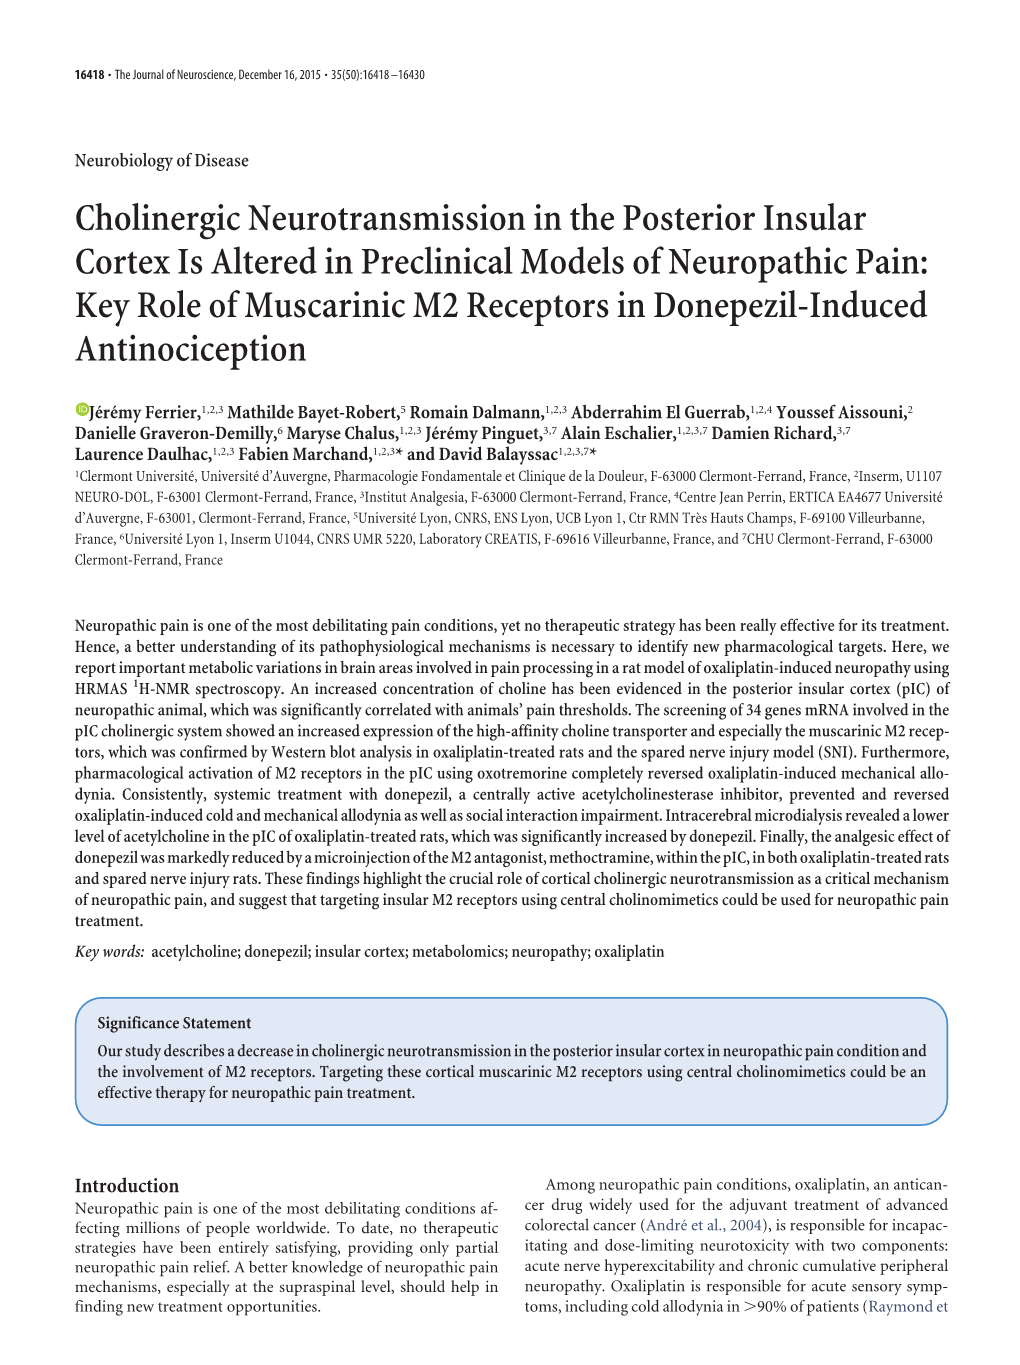 Cholinergic Neurotransmission in the Posterior